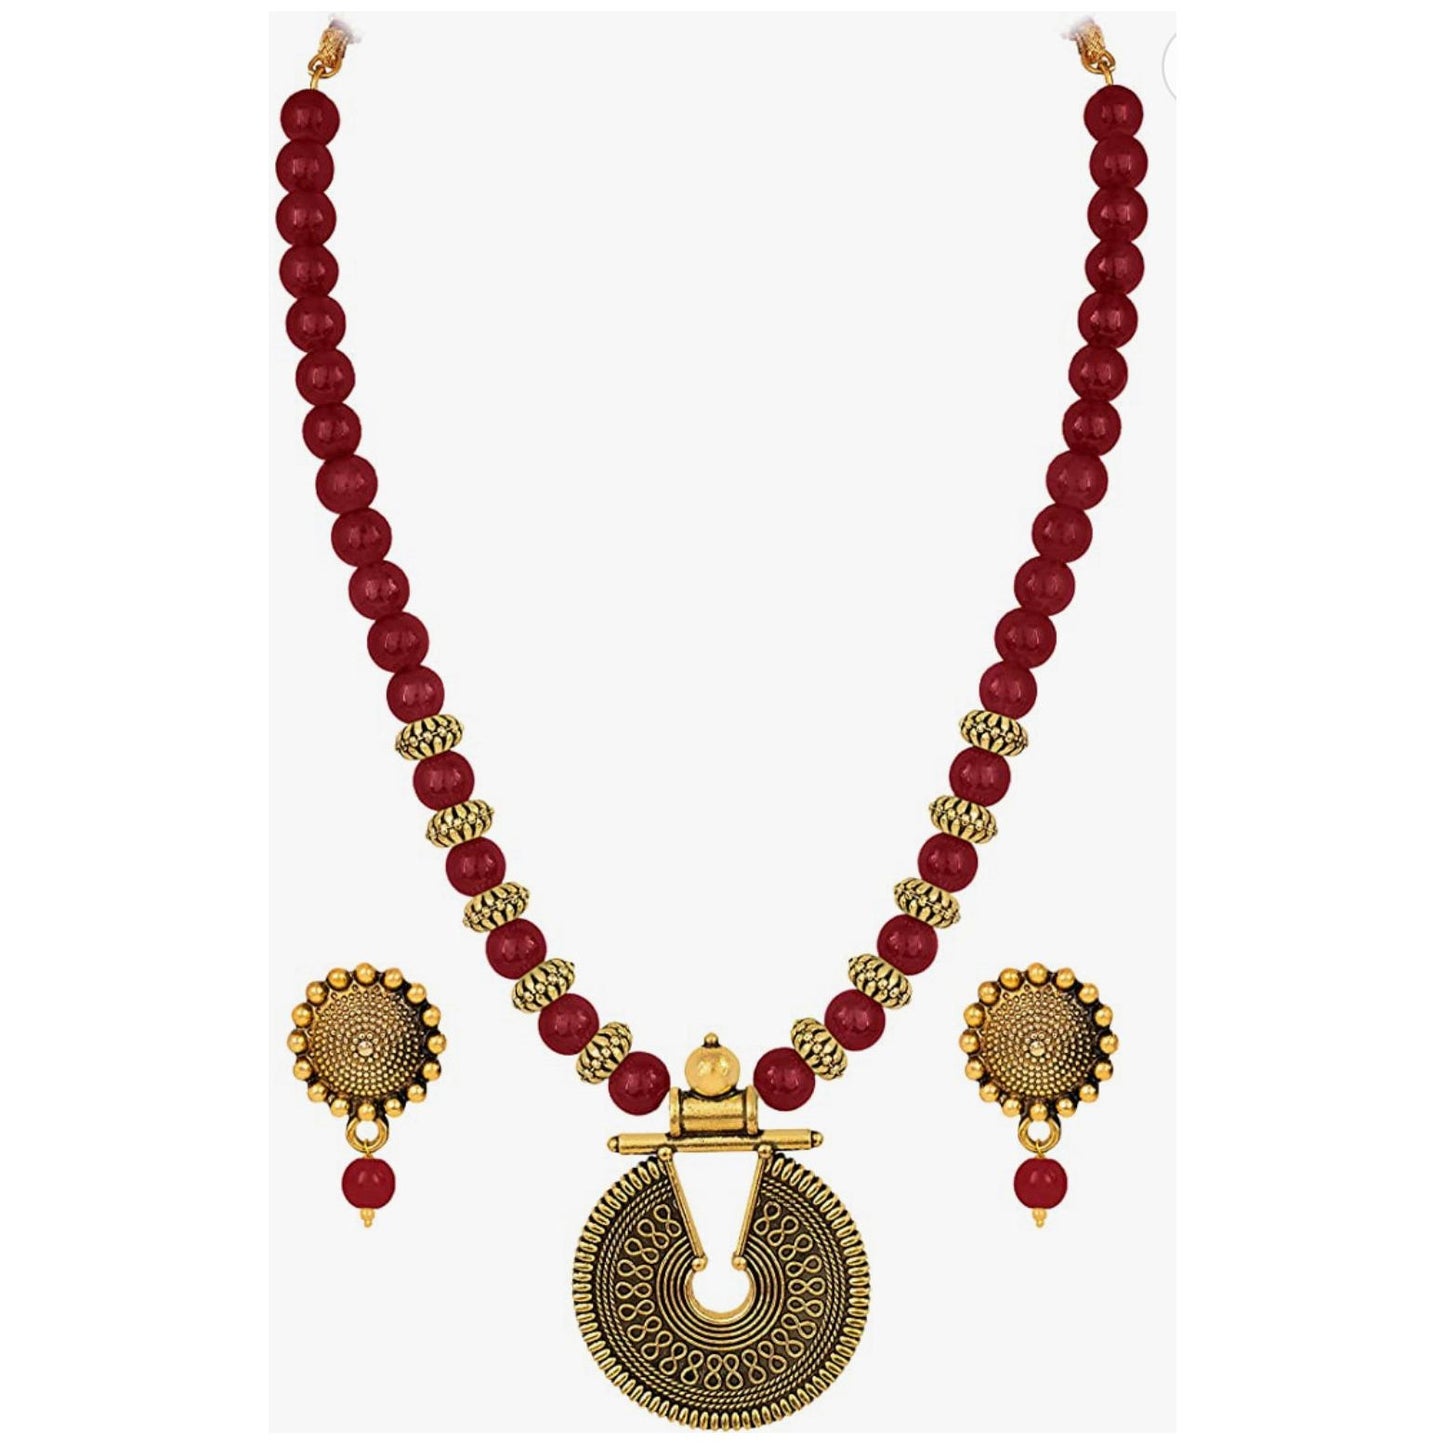 Gold Plated Beaded Necklace Set with Adjustable Thread Closure and Earrings